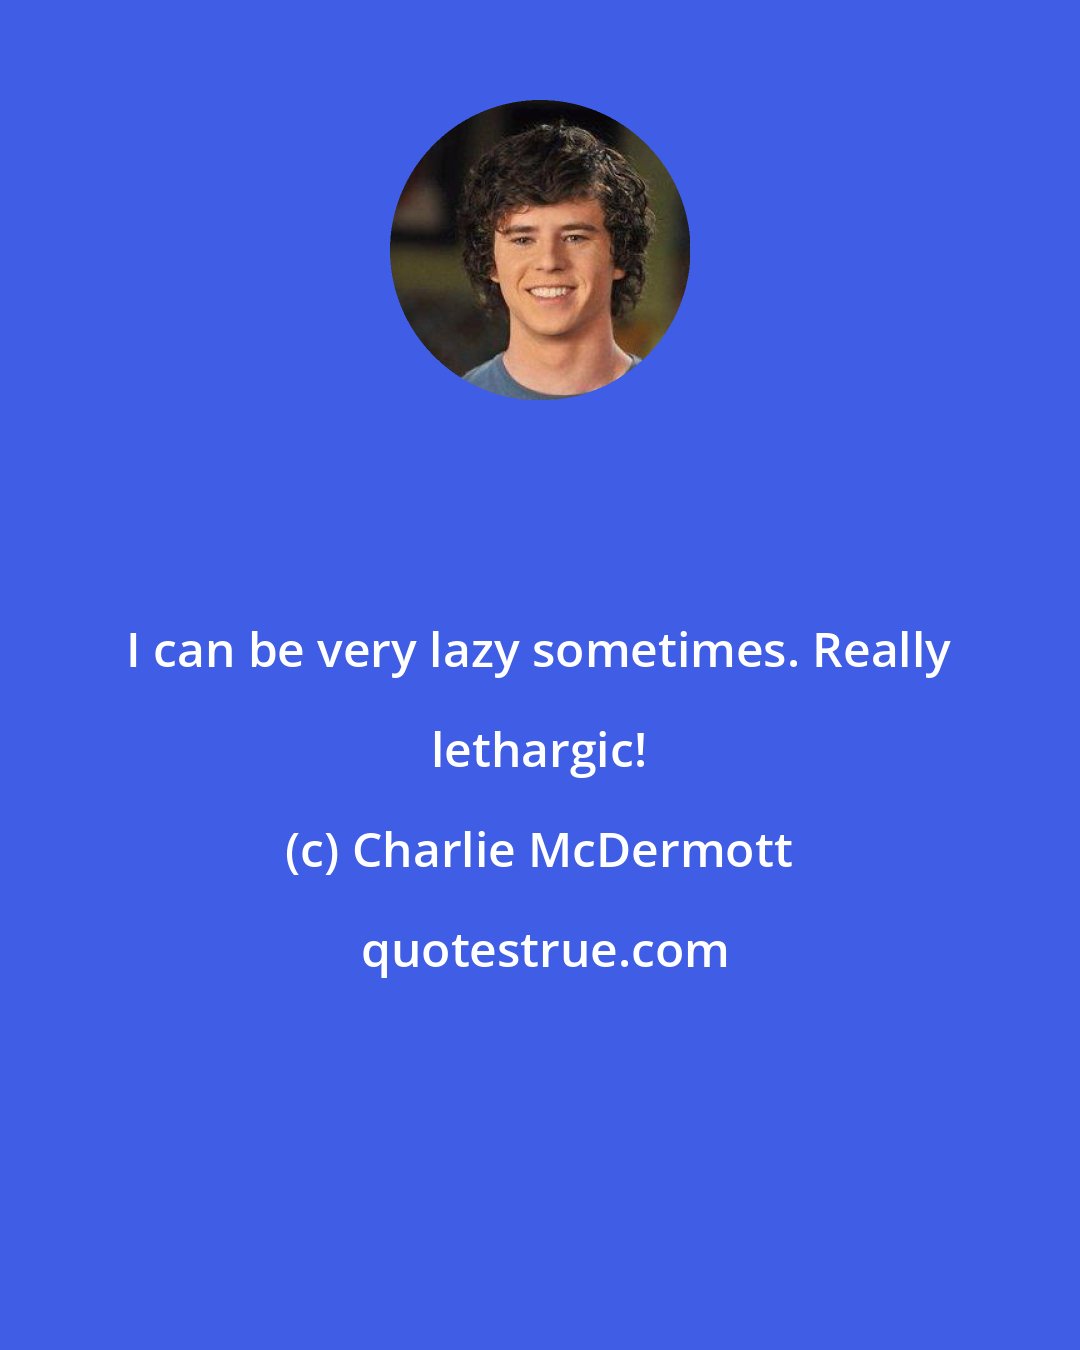 Charlie McDermott: I can be very lazy sometimes. Really lethargic!